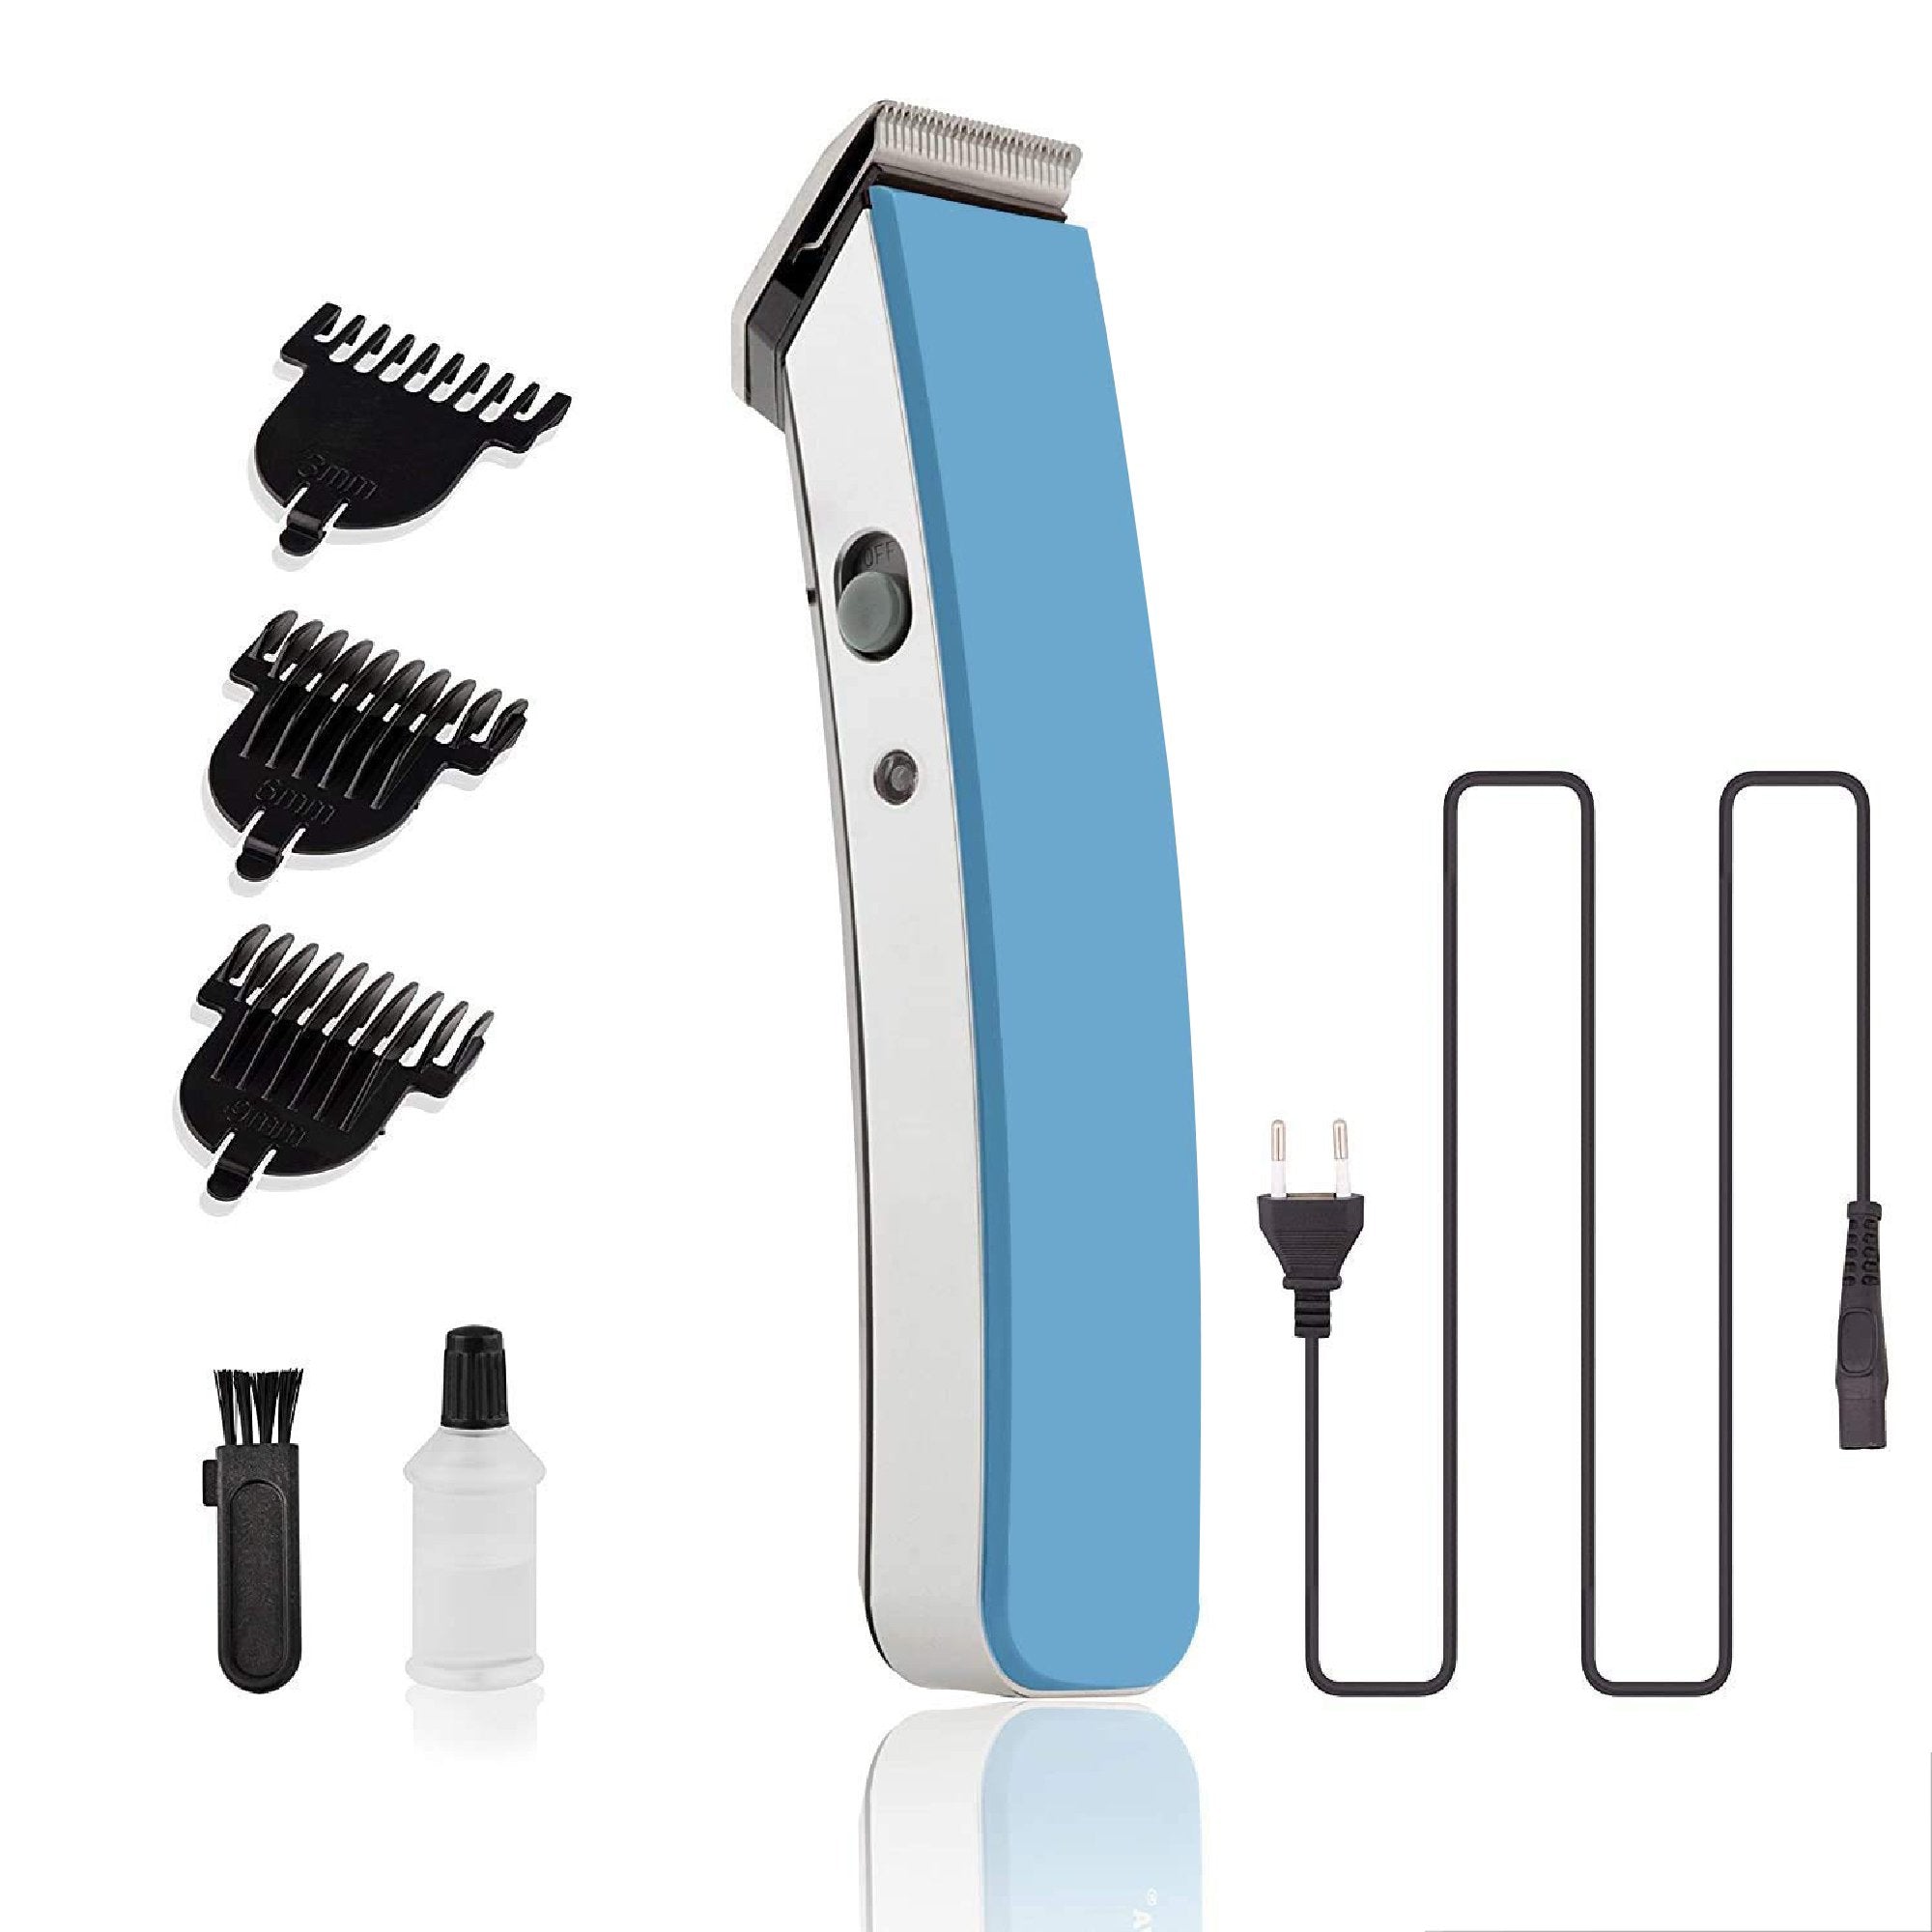 1437 NS-216 rechargeable cordless hair and beard trimmer for men's - SkyShopy